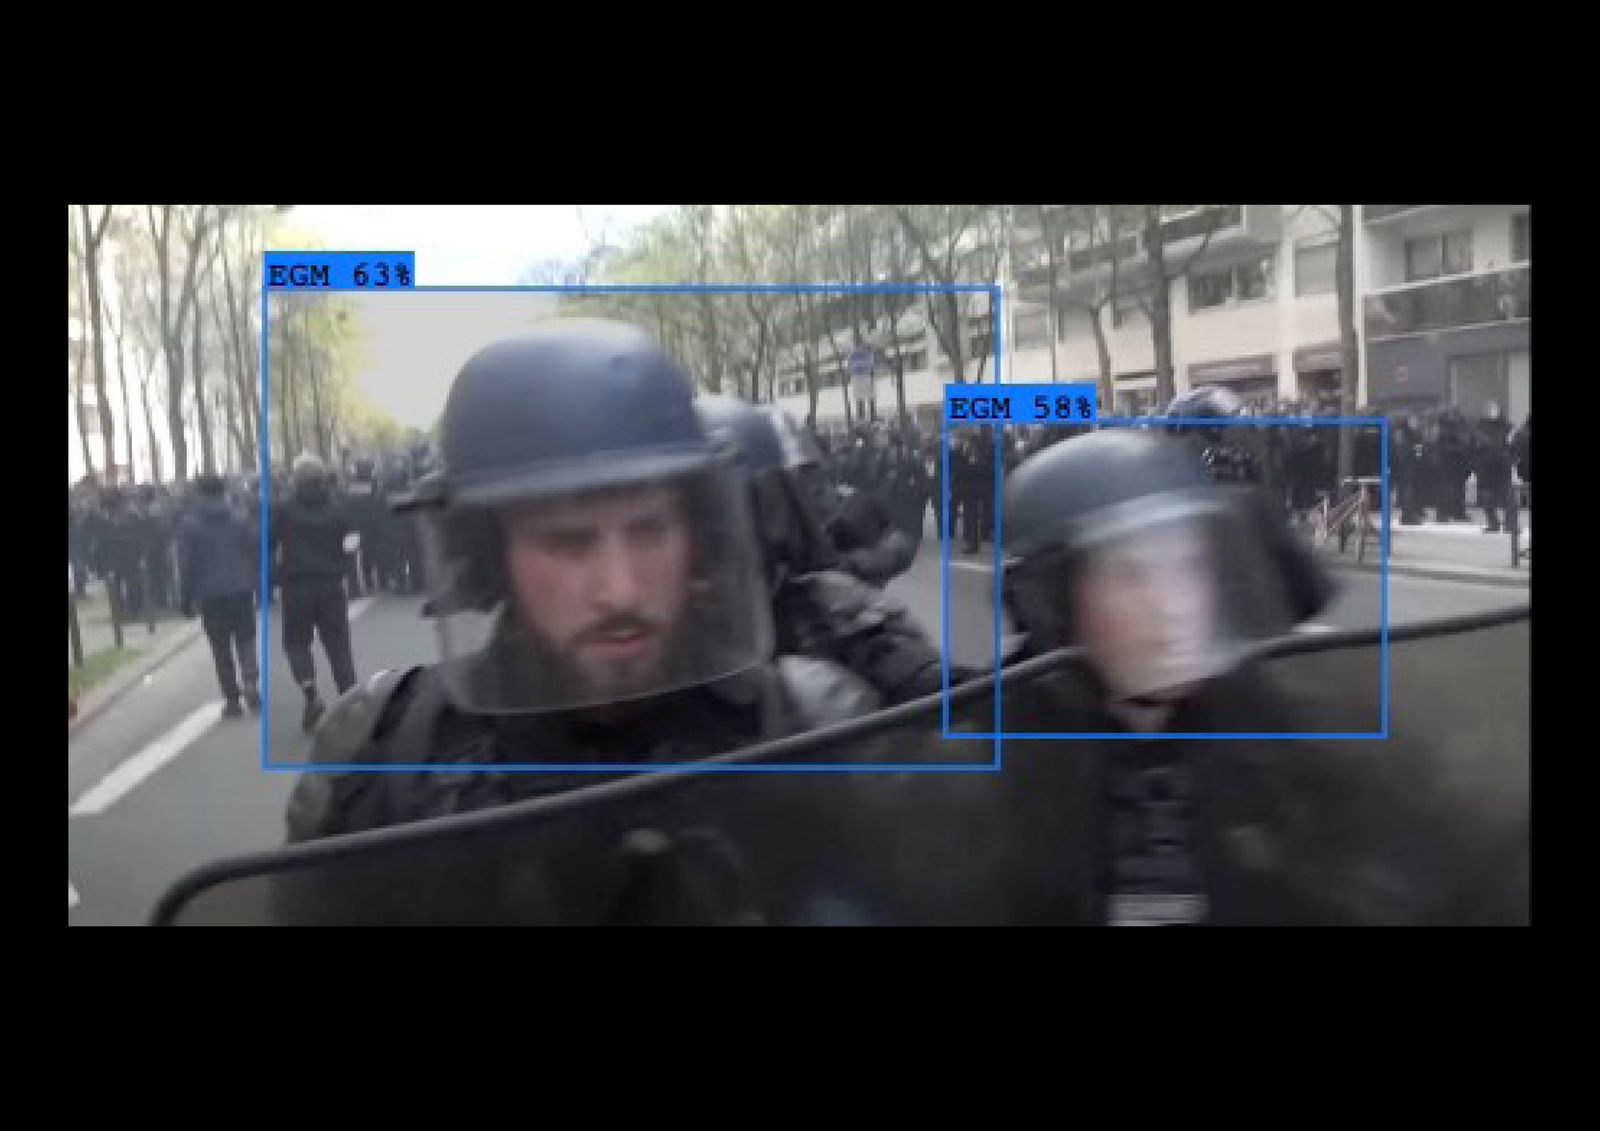 © Marcel Top - Object recognition software trained on police units